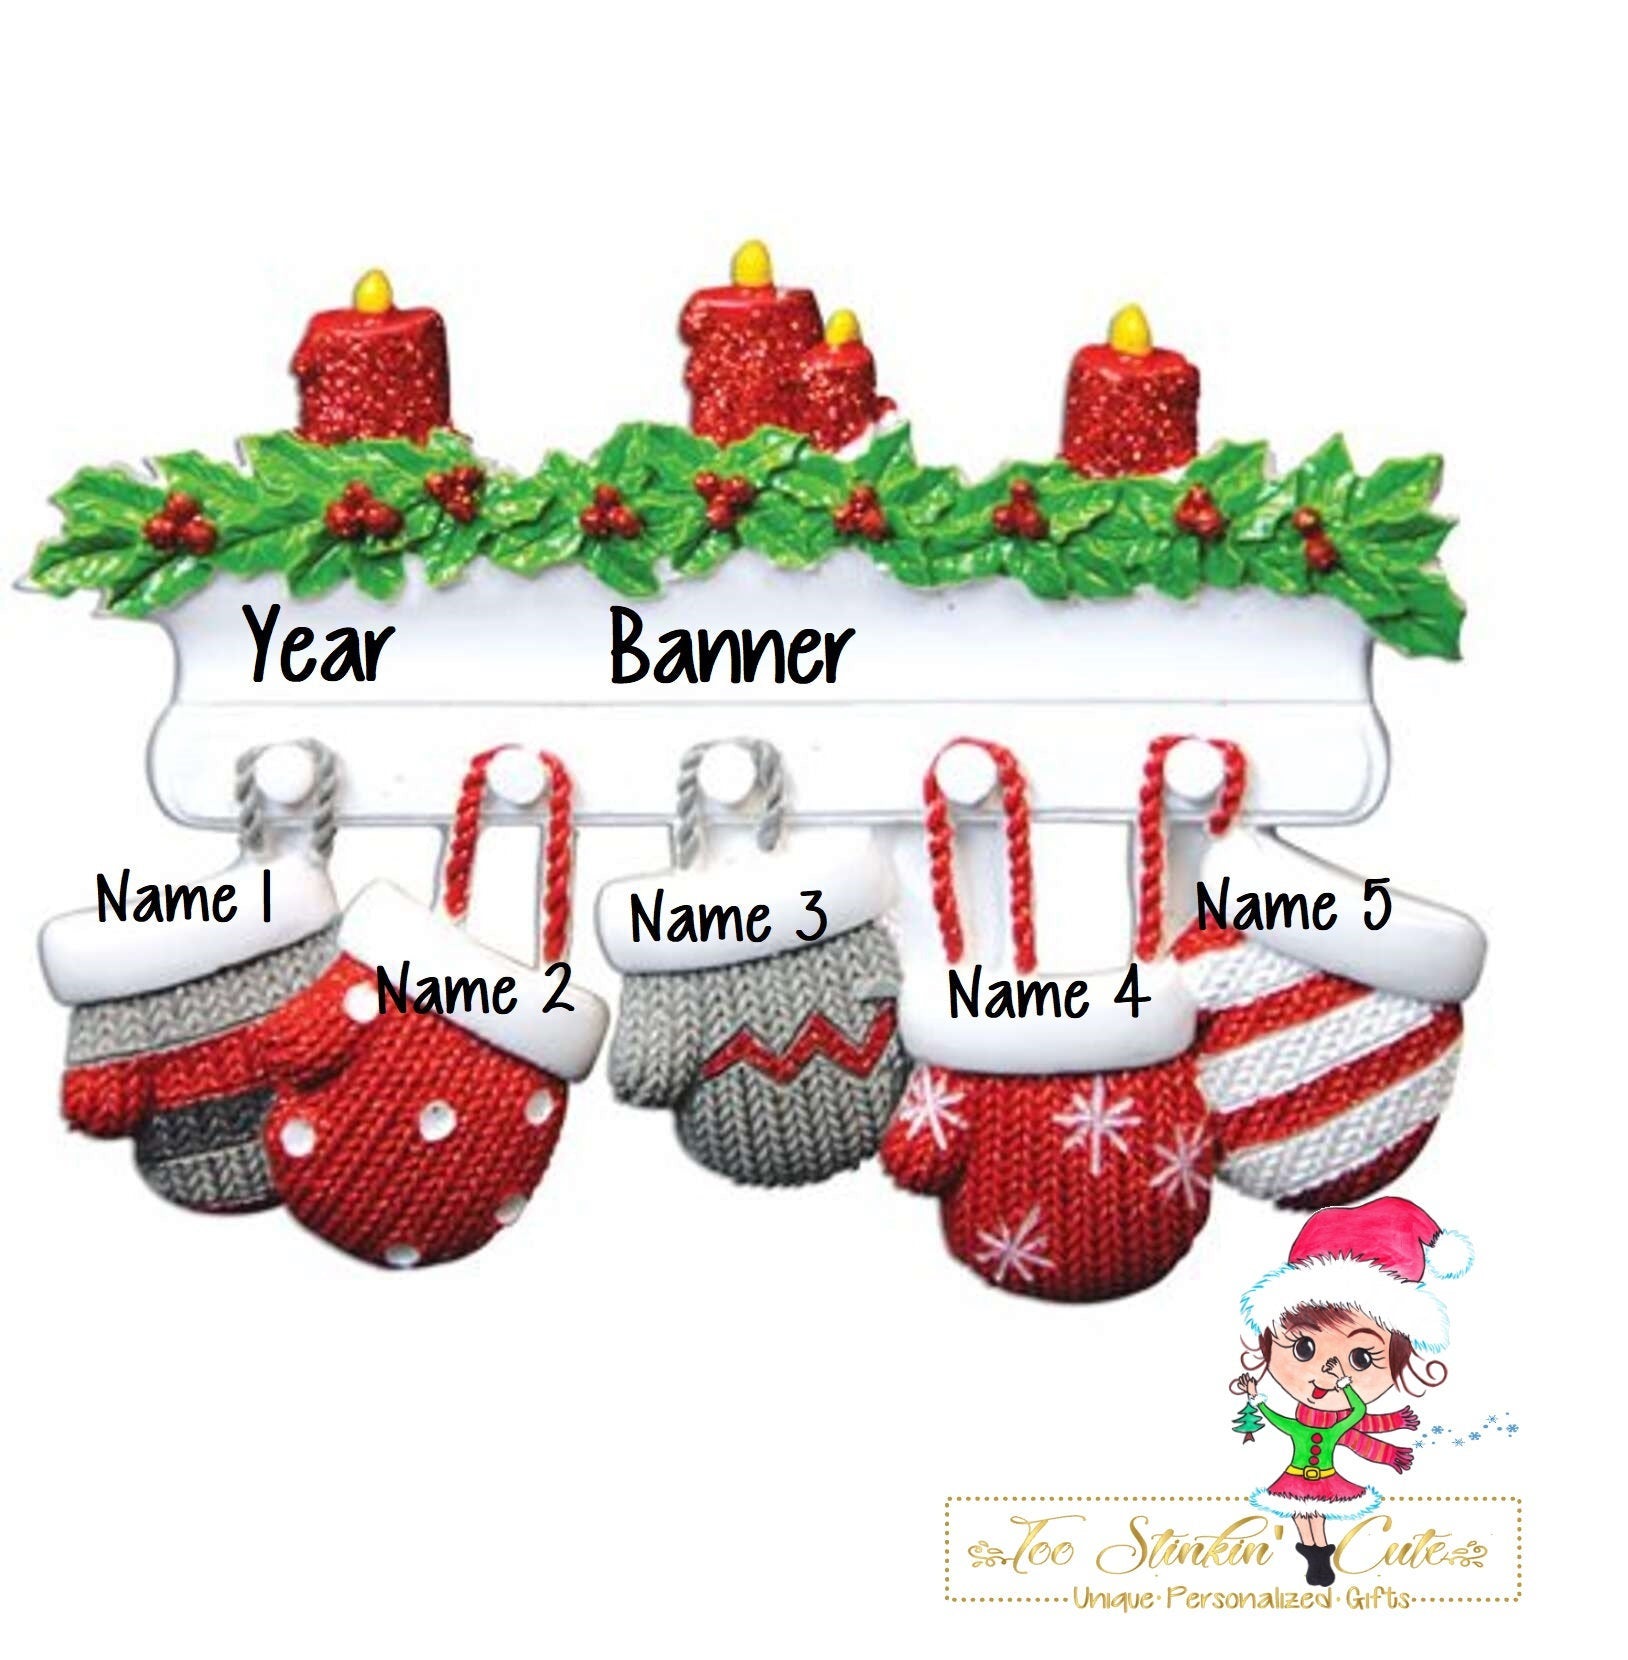 Personalized Christmas Ornament Stockings Mitten Family of 5/Best Friends/ Coworkers + Free Shipping!